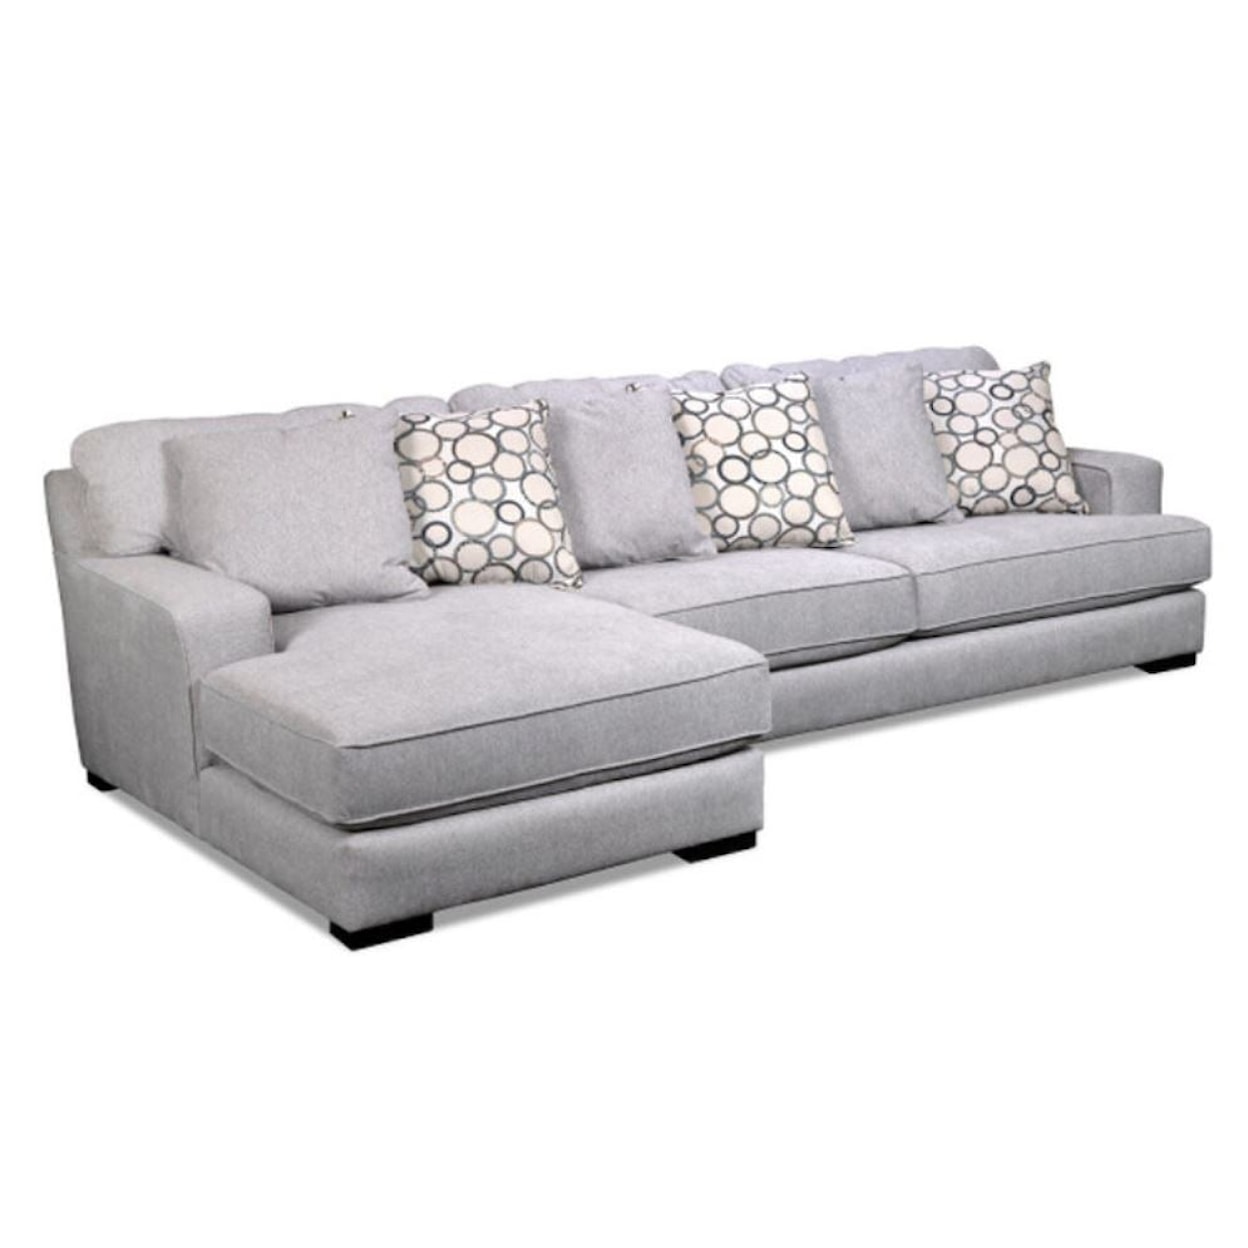 Southside Designs Ruth 2 Piece Sectional